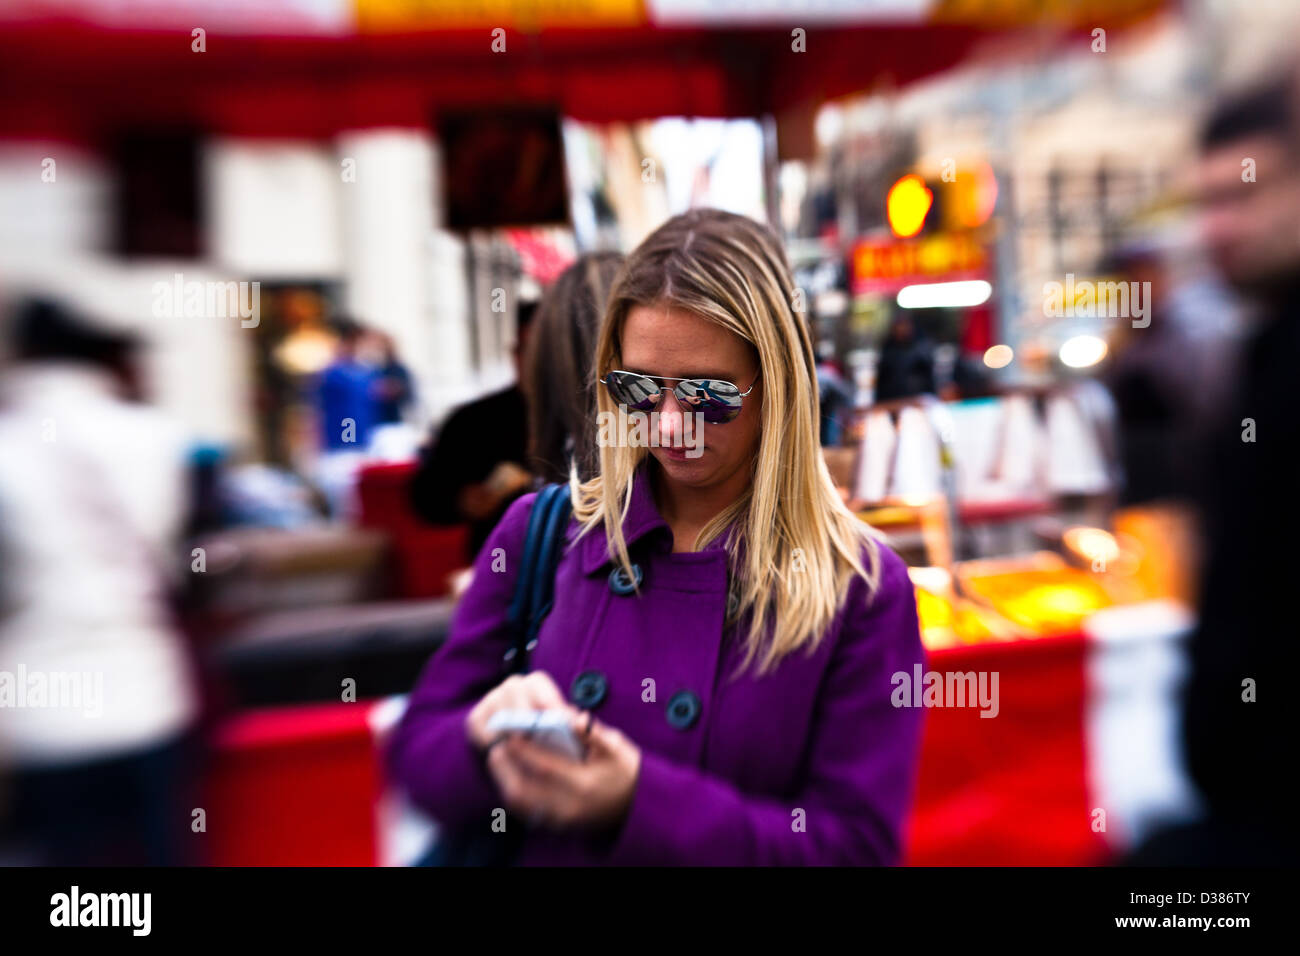 Young Woman getting ready to use her phone at a street fair Stock Photo